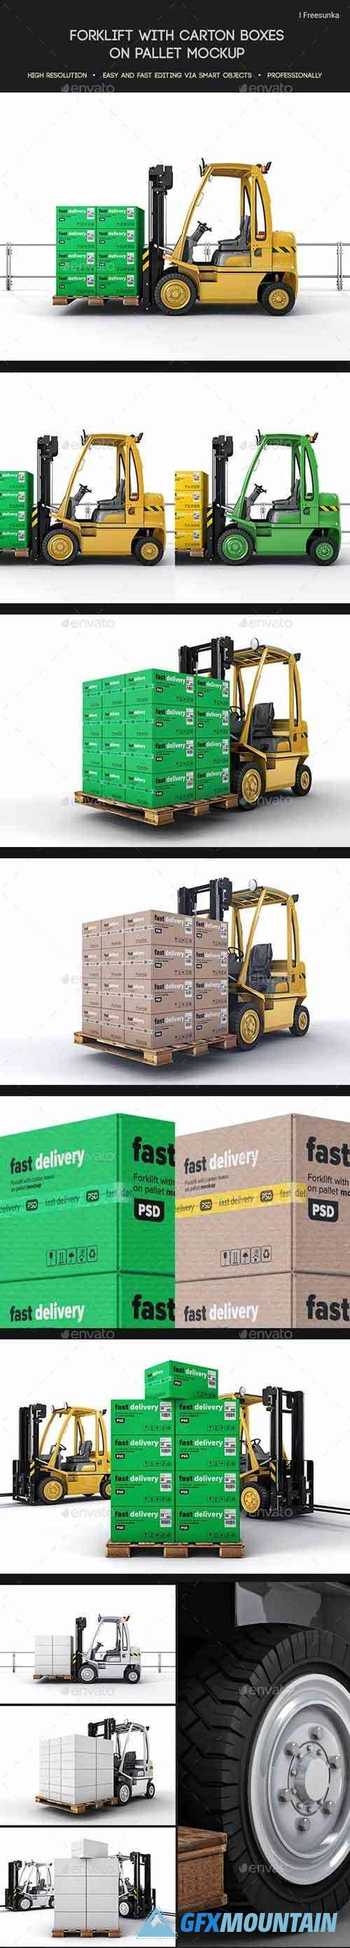 Forklift With Carton Boxes On Pallet Mockup